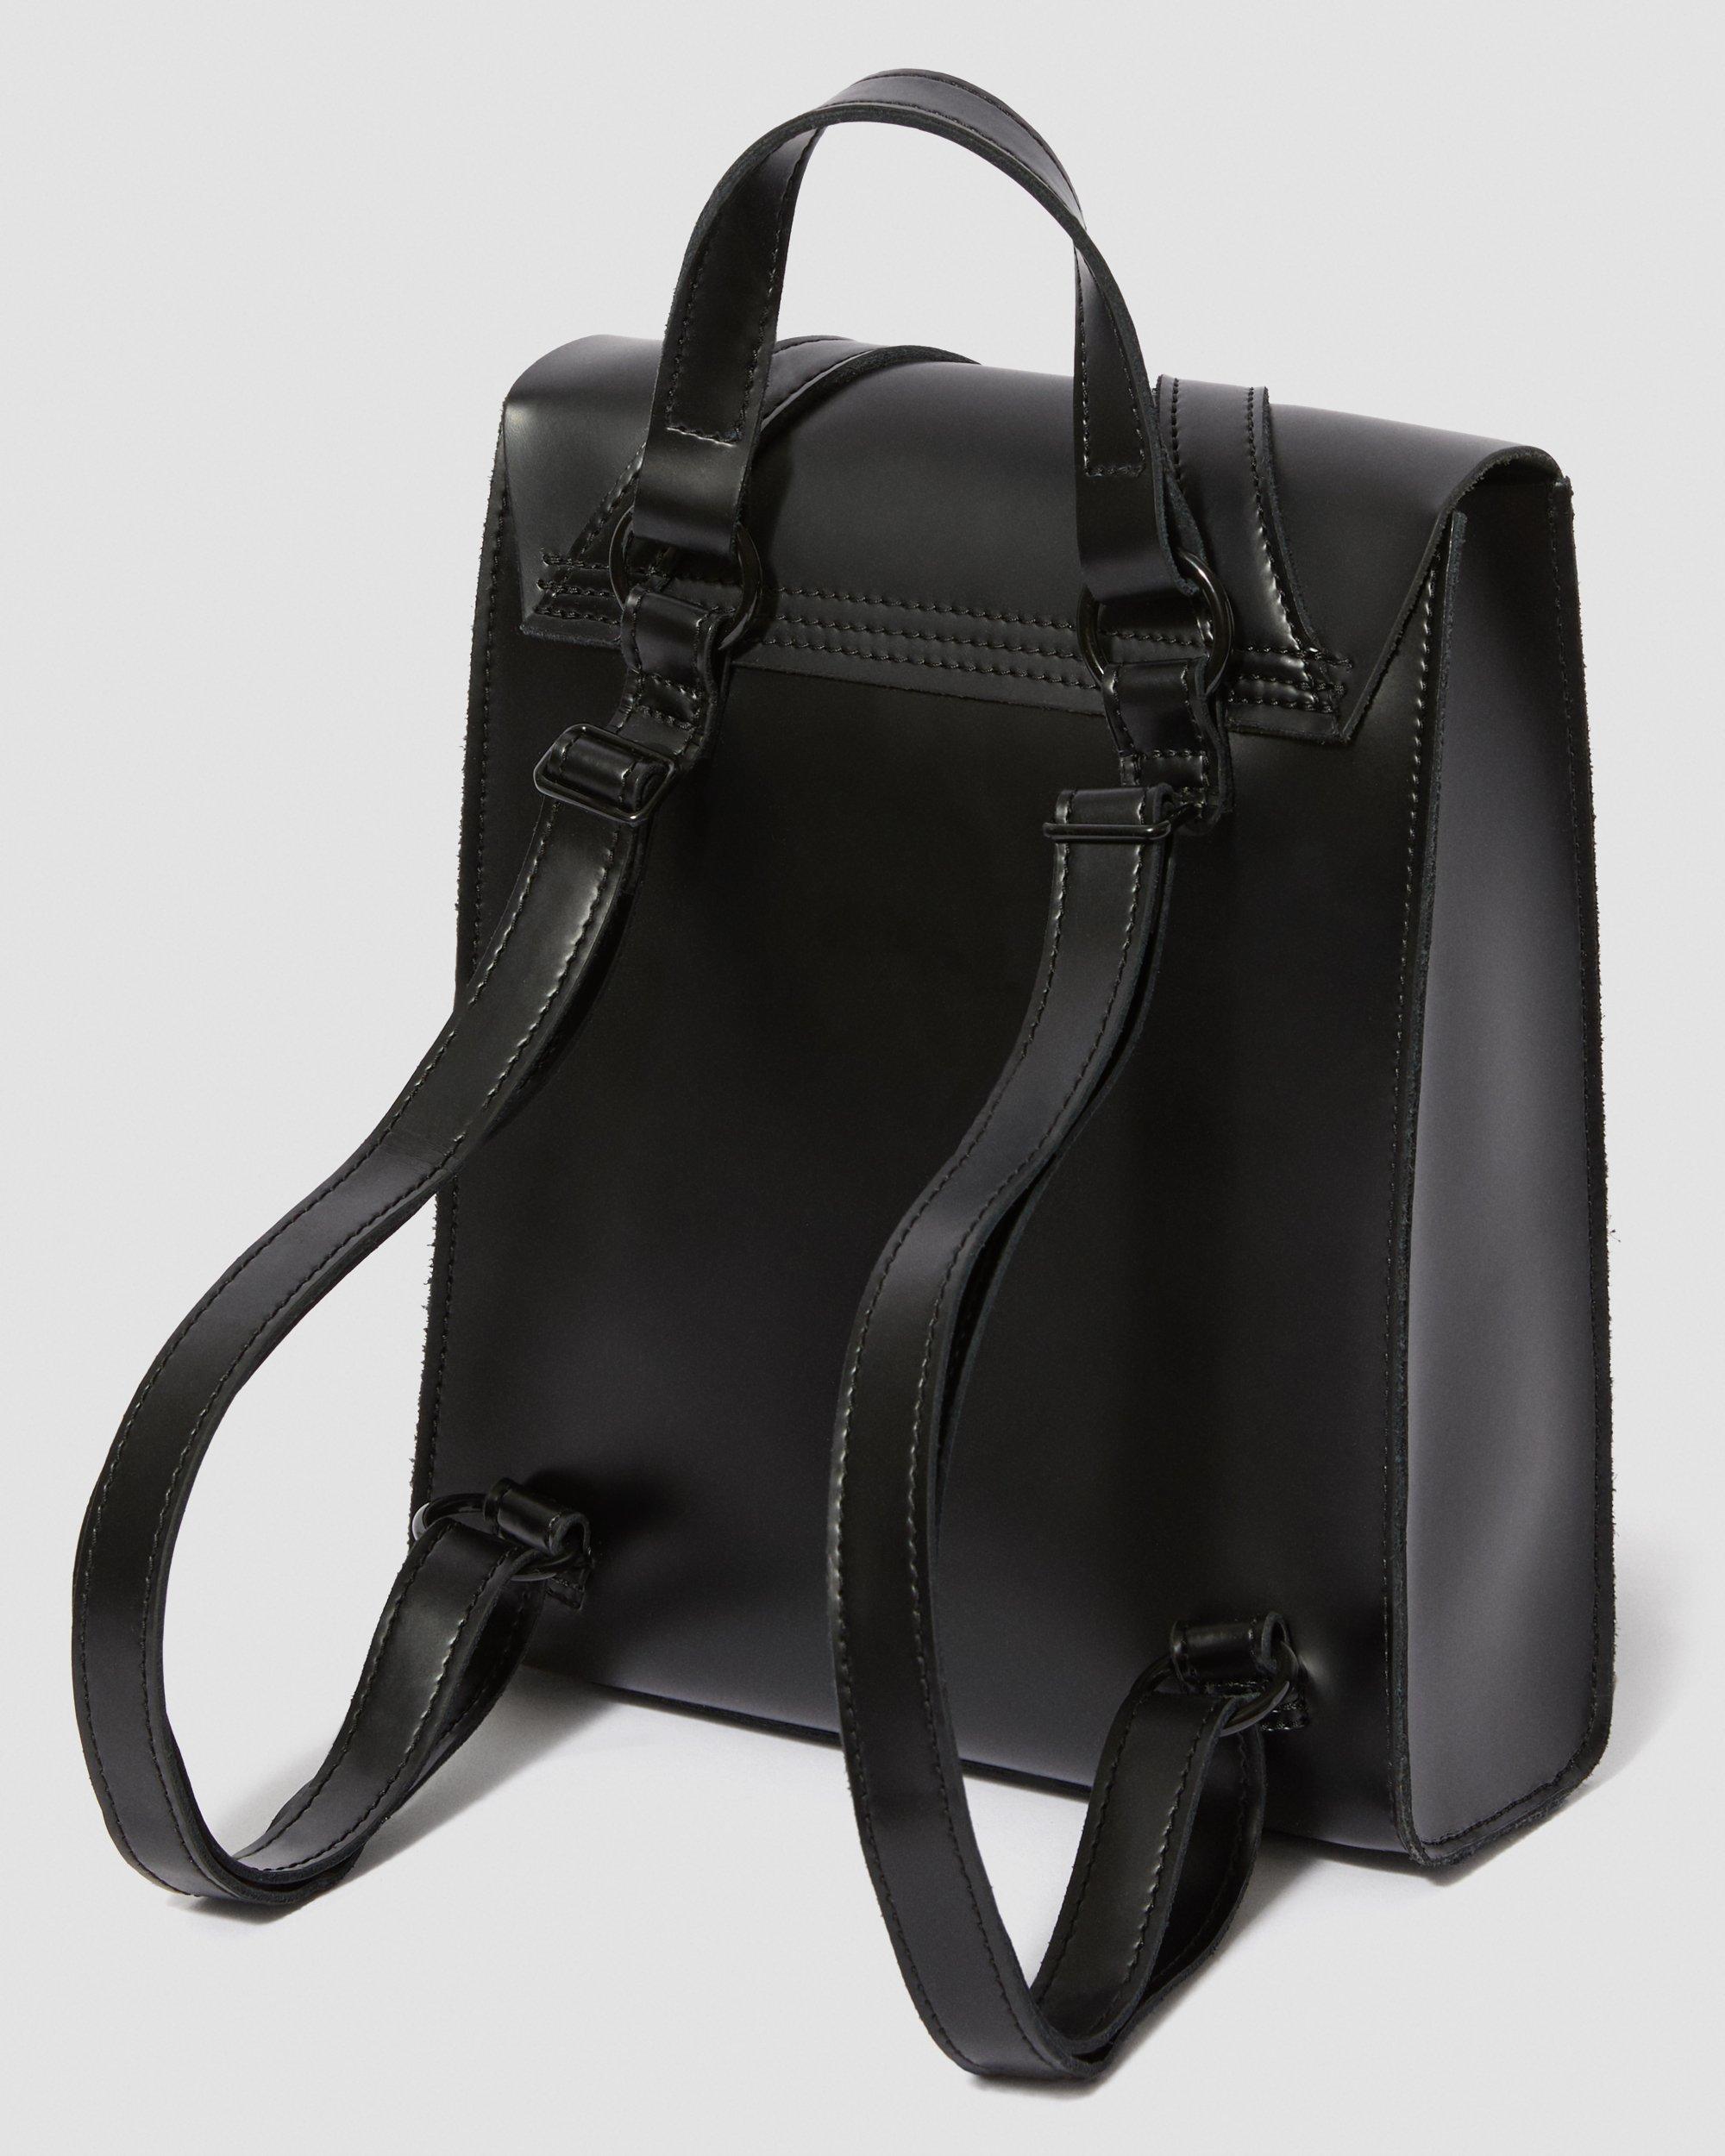 BUCKLE LEATHER MINI BACKPACK in Black